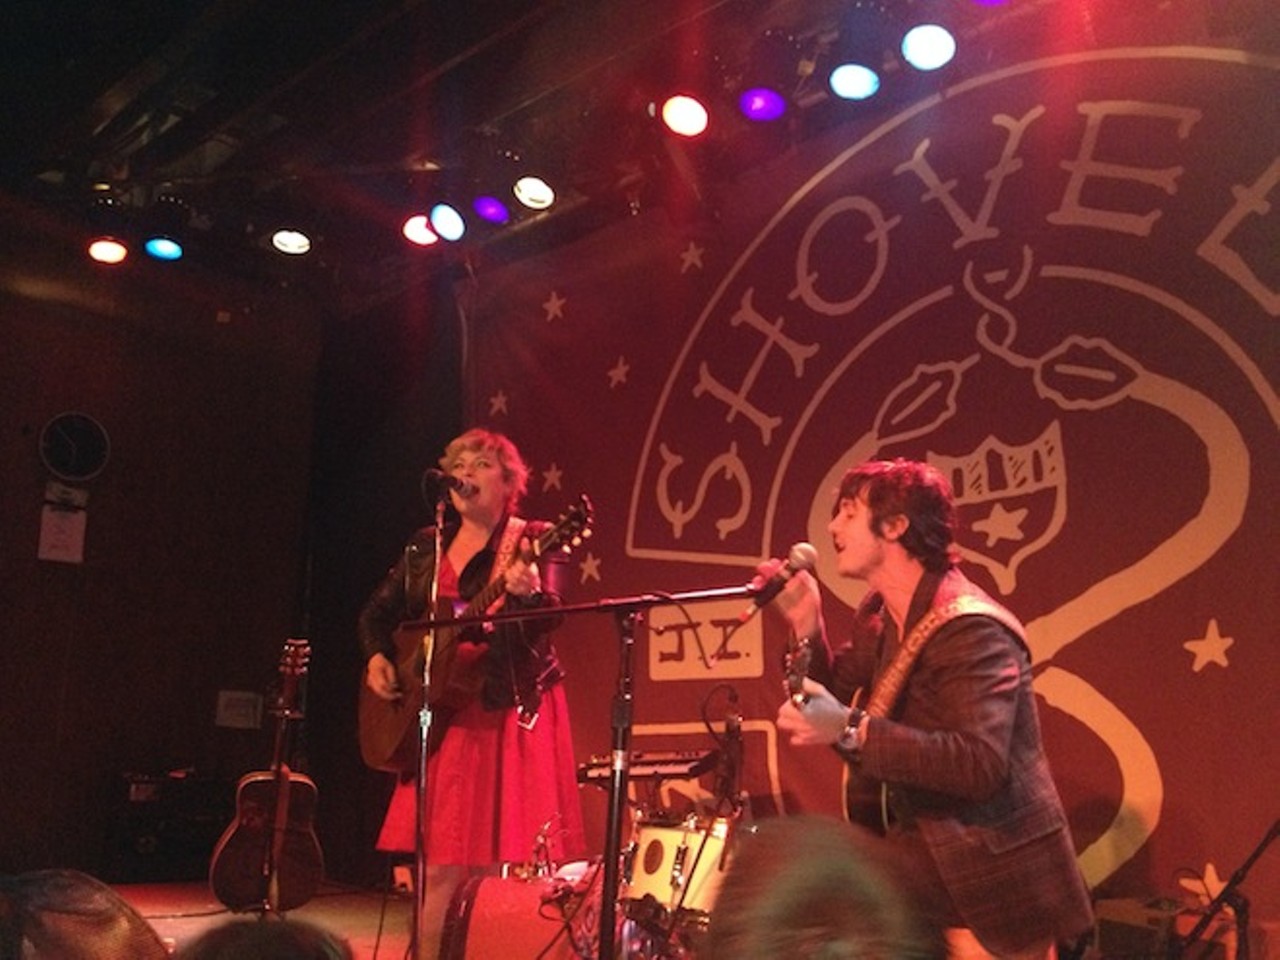 Shovels and Rope concert at the Social